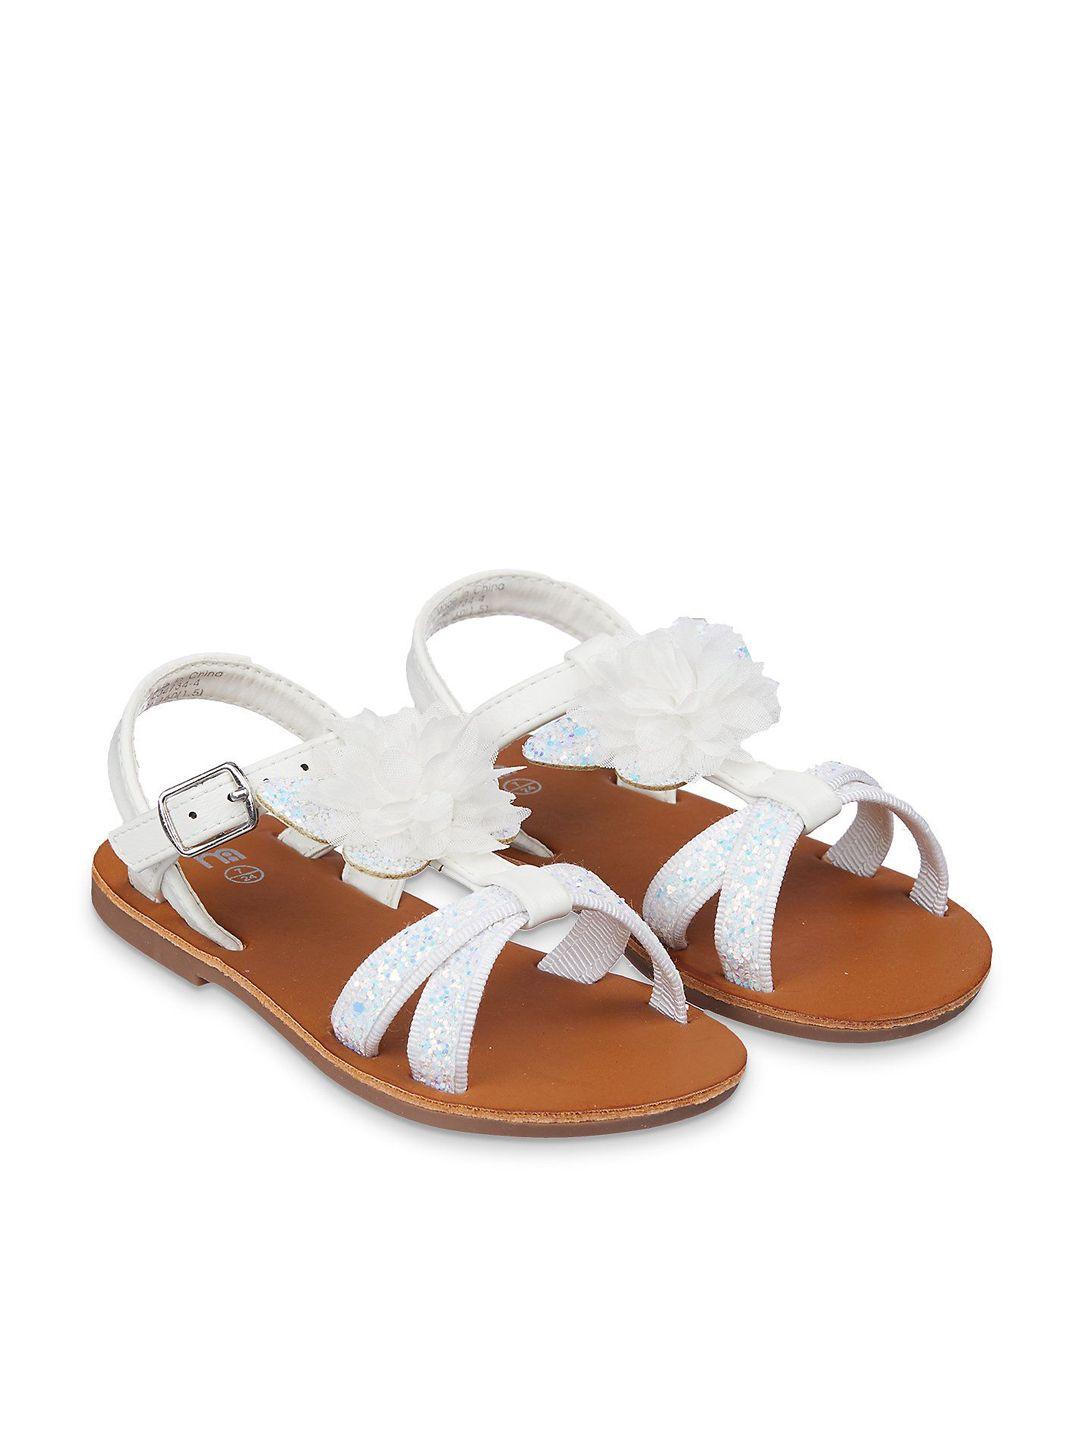 mothercare girls white embellished open toe flats with bows